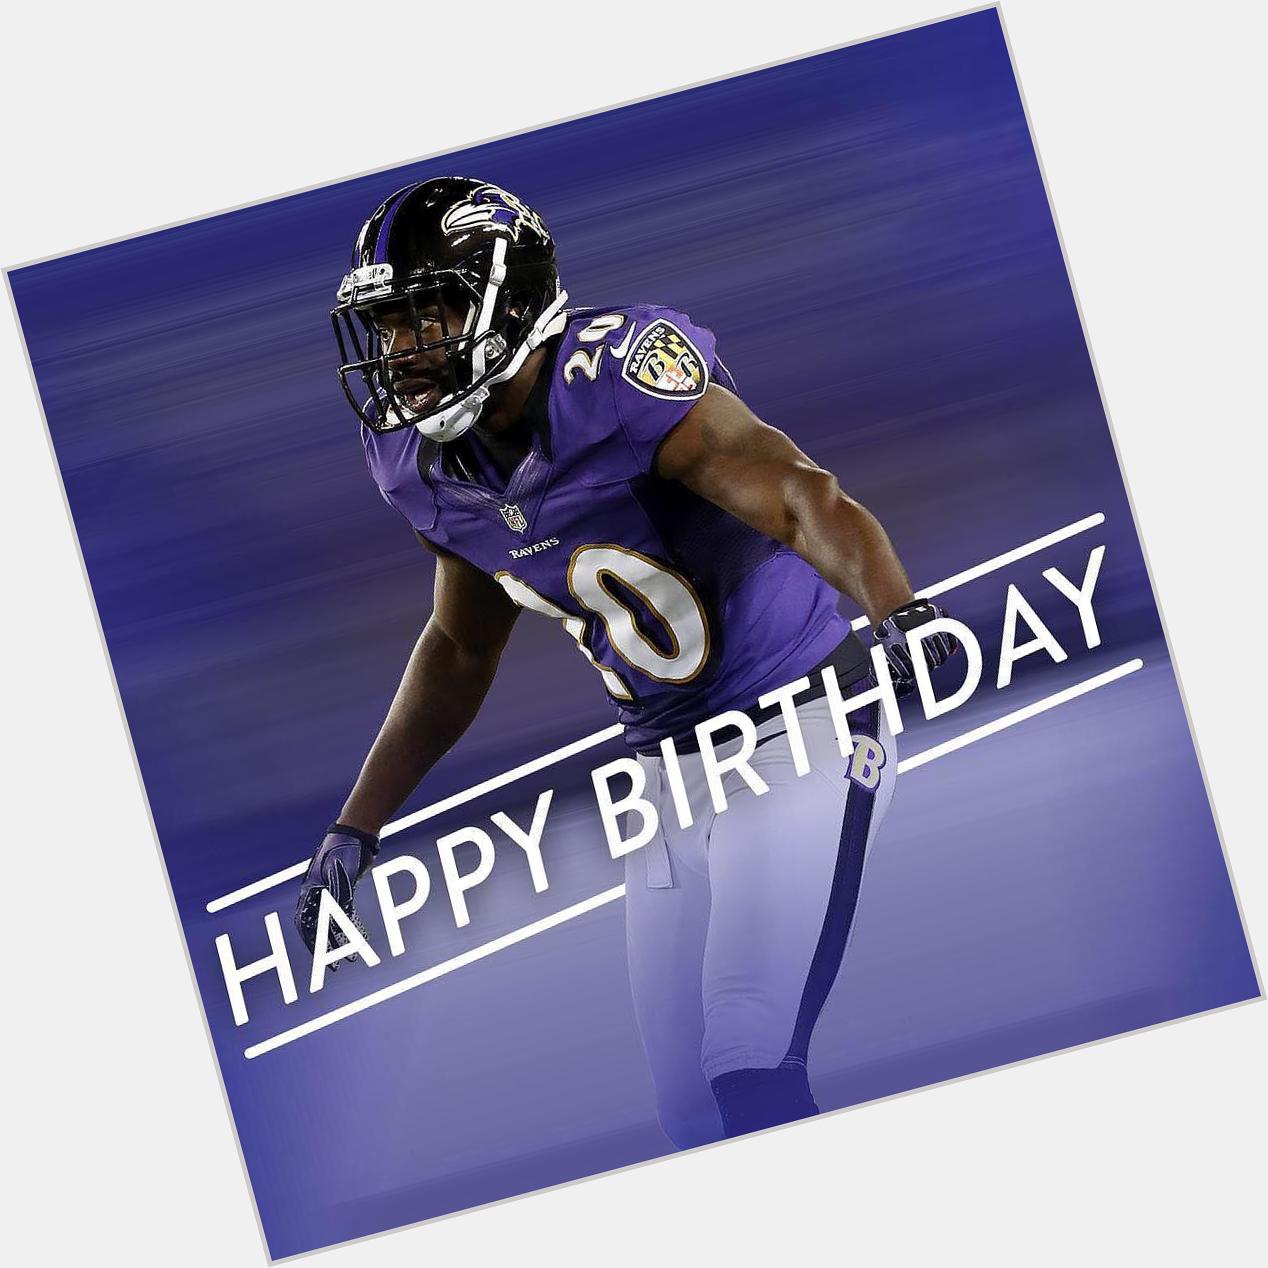 Happy Birthday to legend Ed Reed! by nfl  